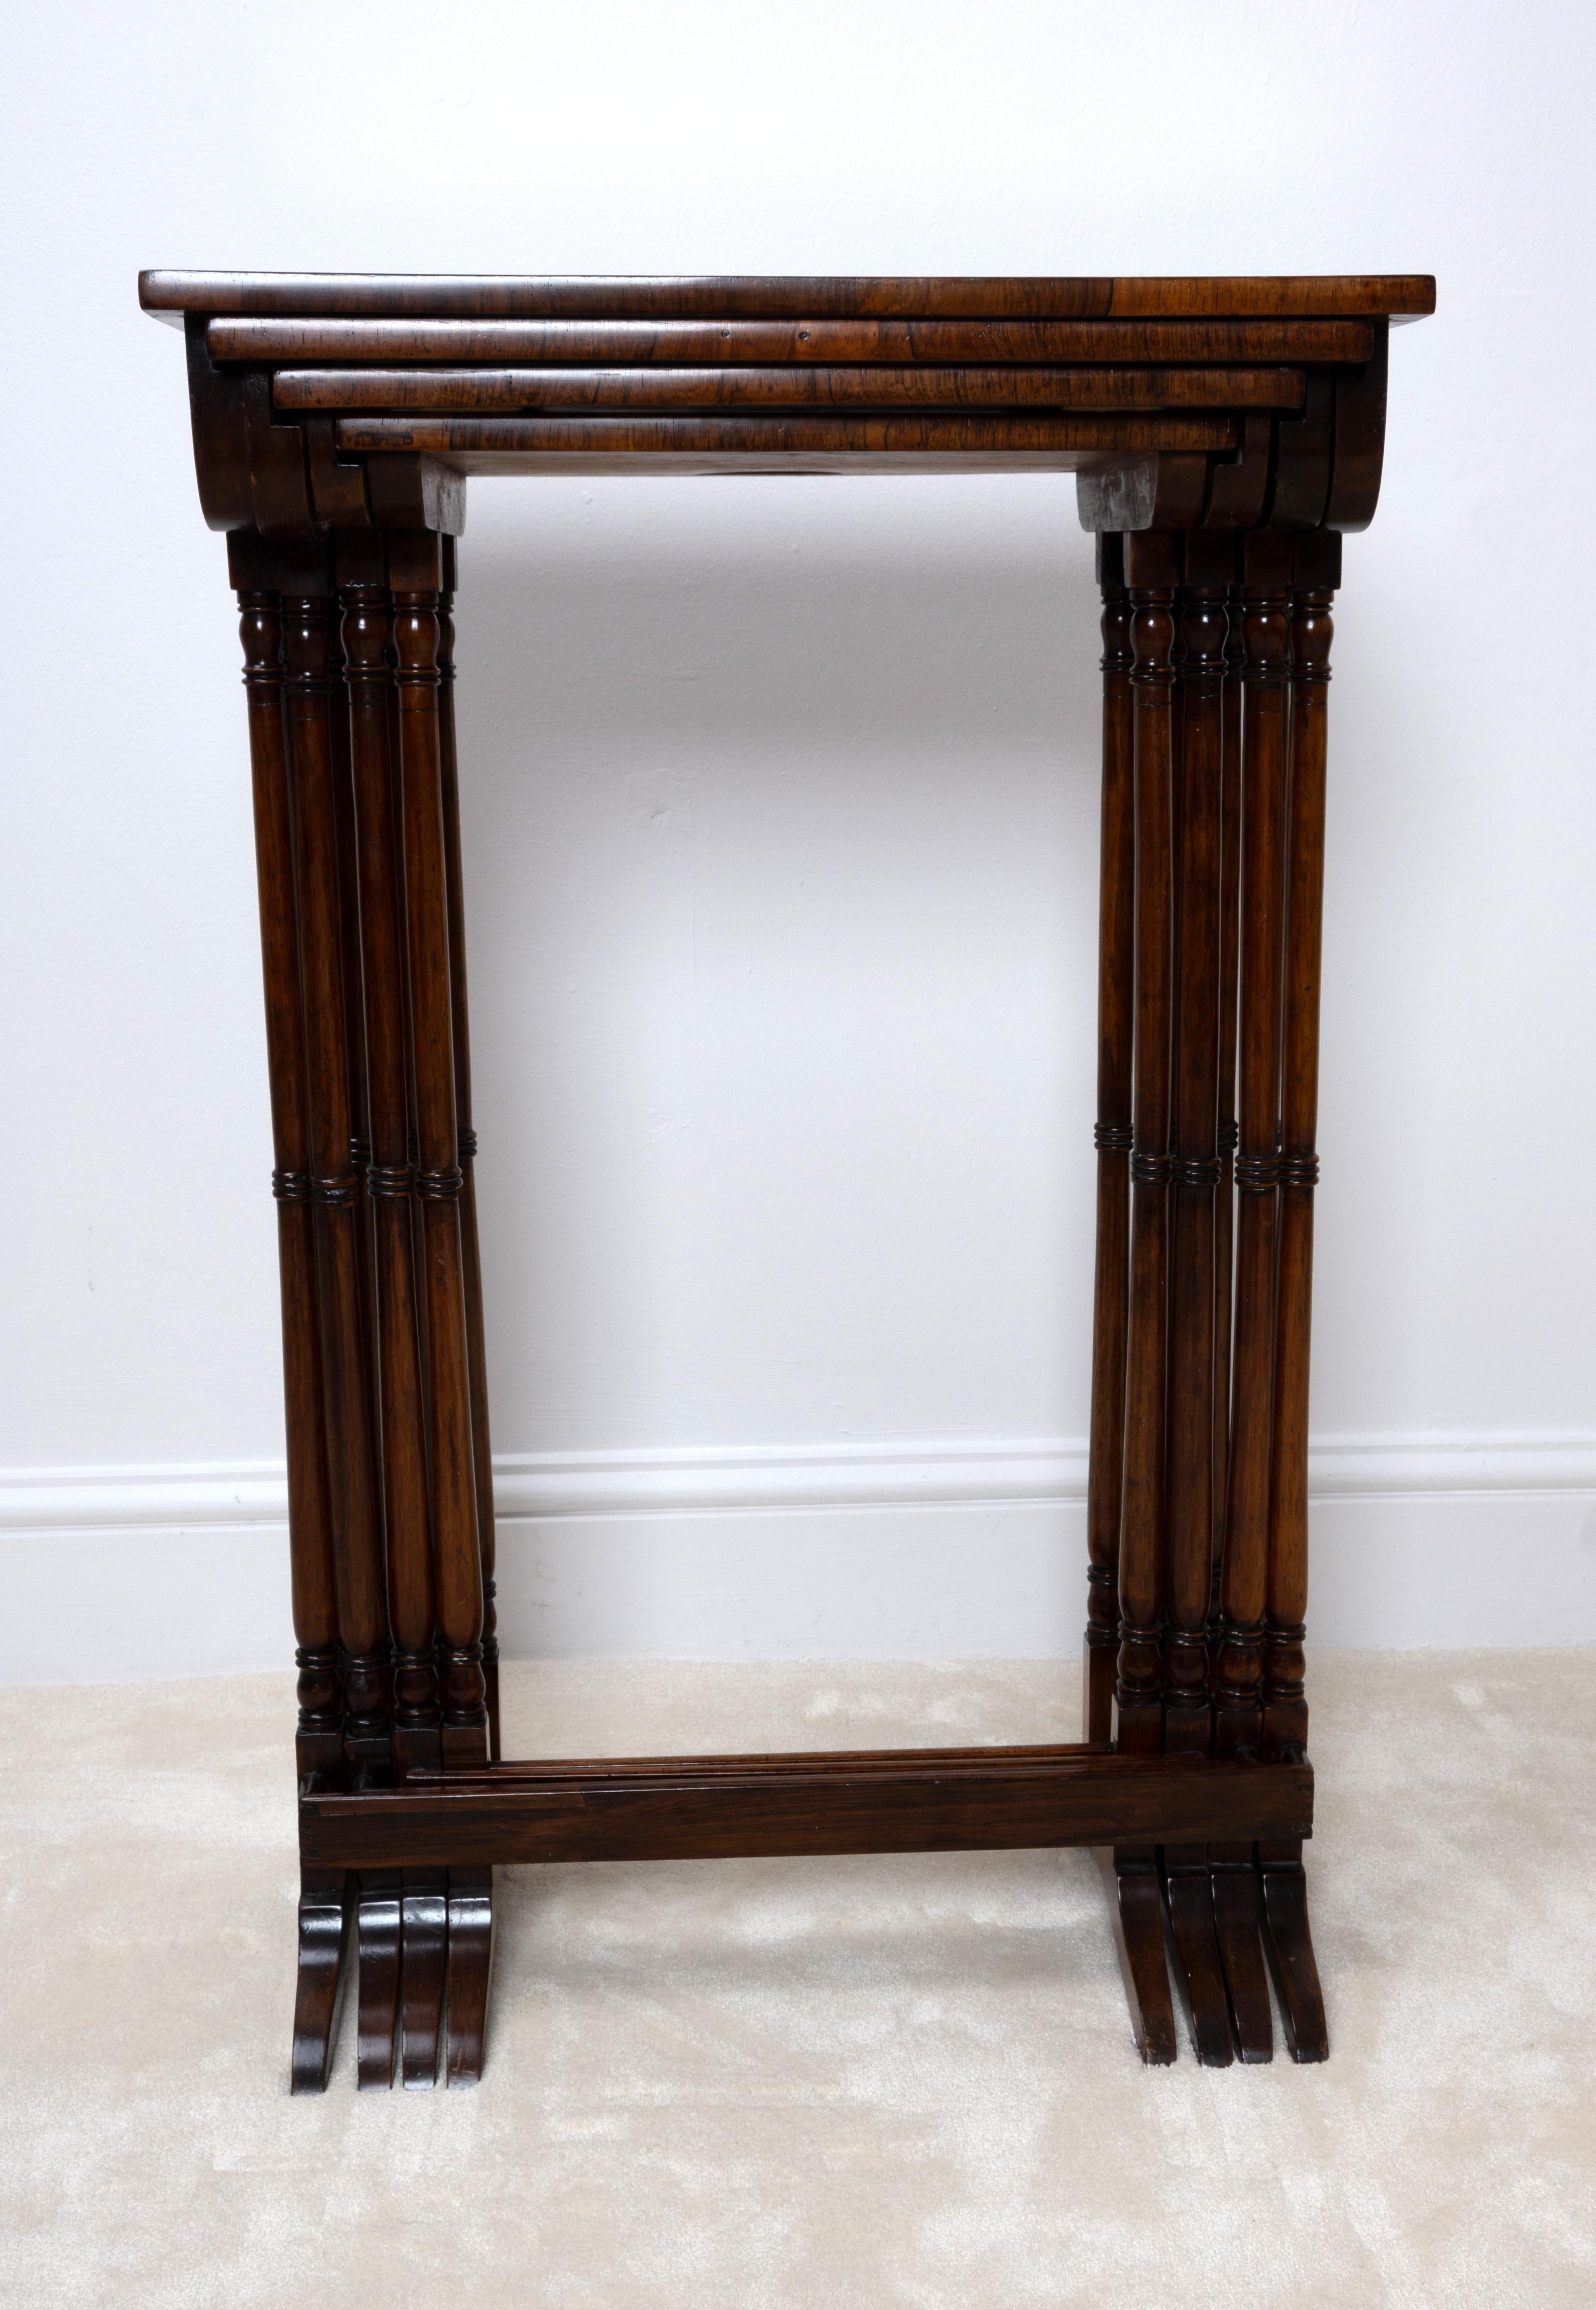 Antique English Regency Revival Rosewood Quartetto Of Nesting Table C.1820 For Sale 11